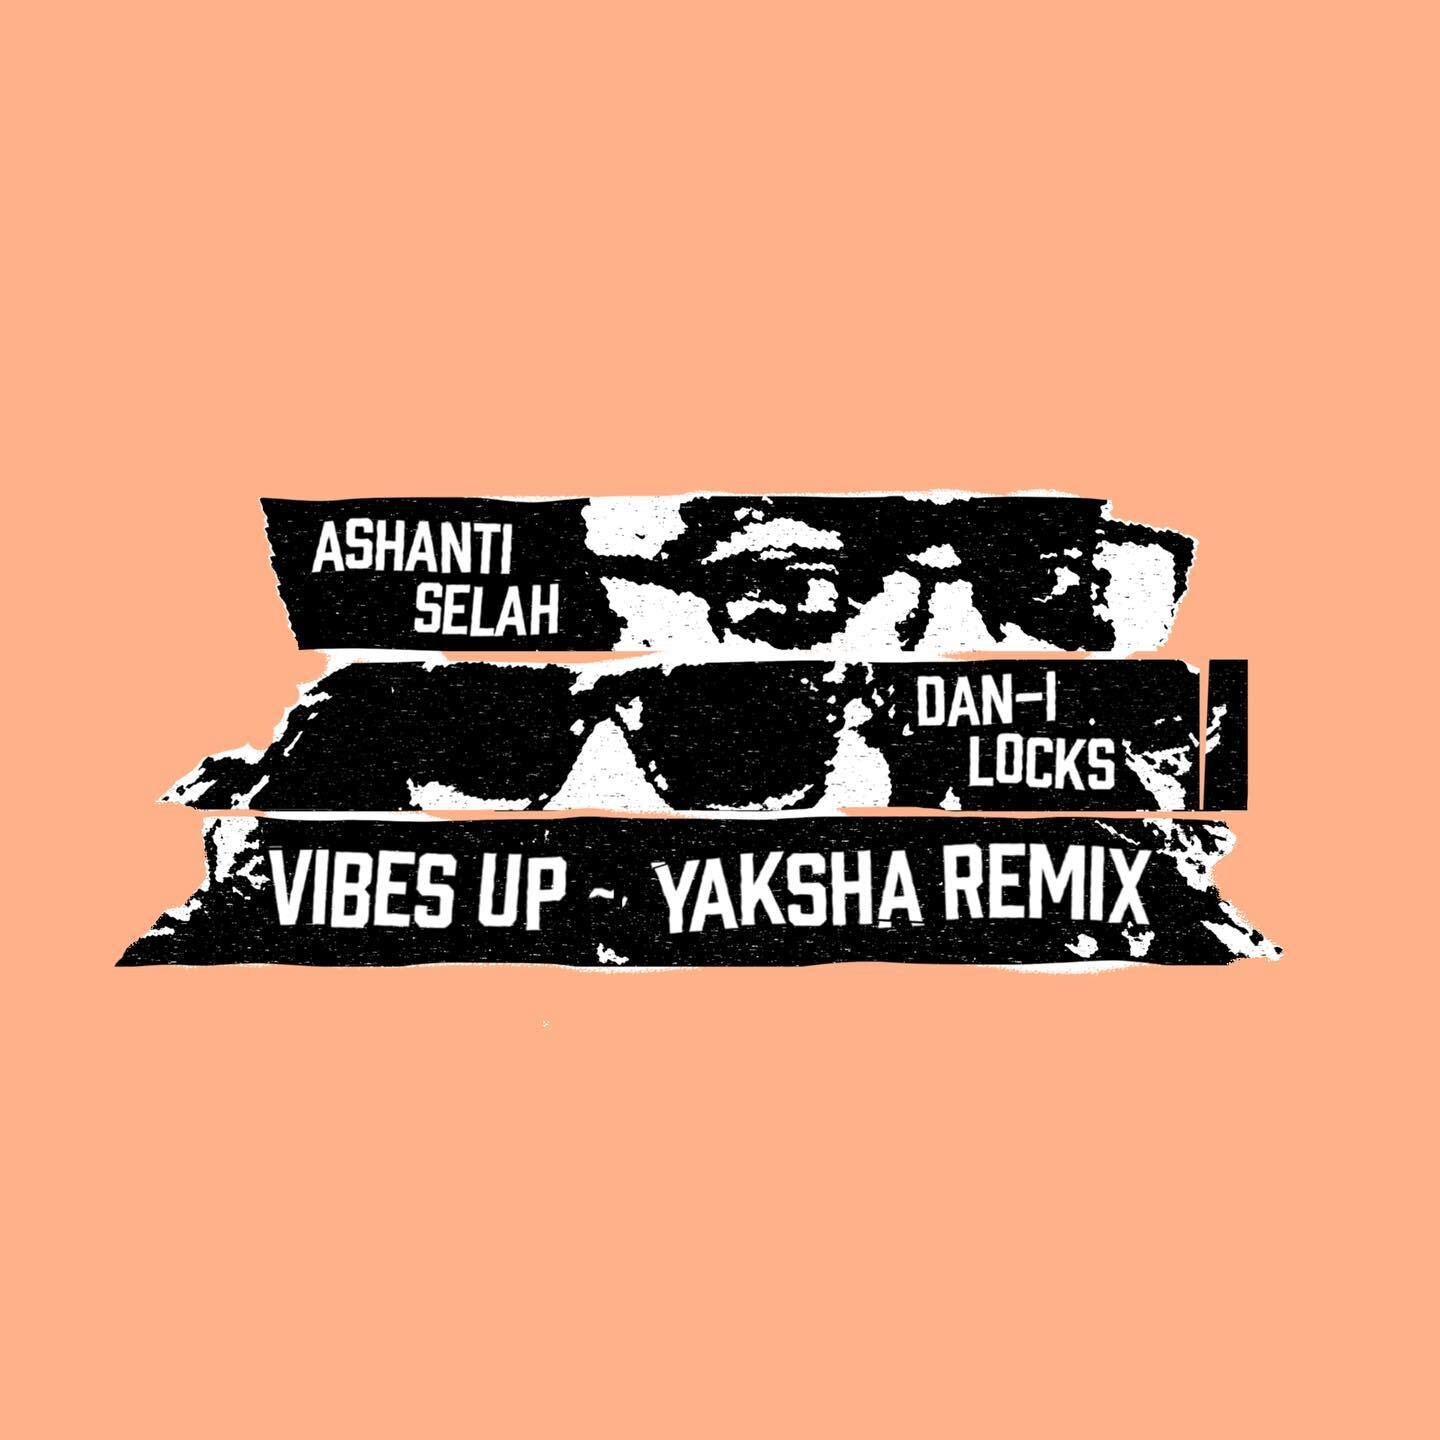 Vibes Up (Yaksha Remix) is now available on all good streaming/download platforms!

Link in bio will get you to where you need to be 

Vinyl is fully sold out (after being on sale for only one hour)

@ashantiselahdub 
@dan_i_locks 
@yakshasounds 

#d